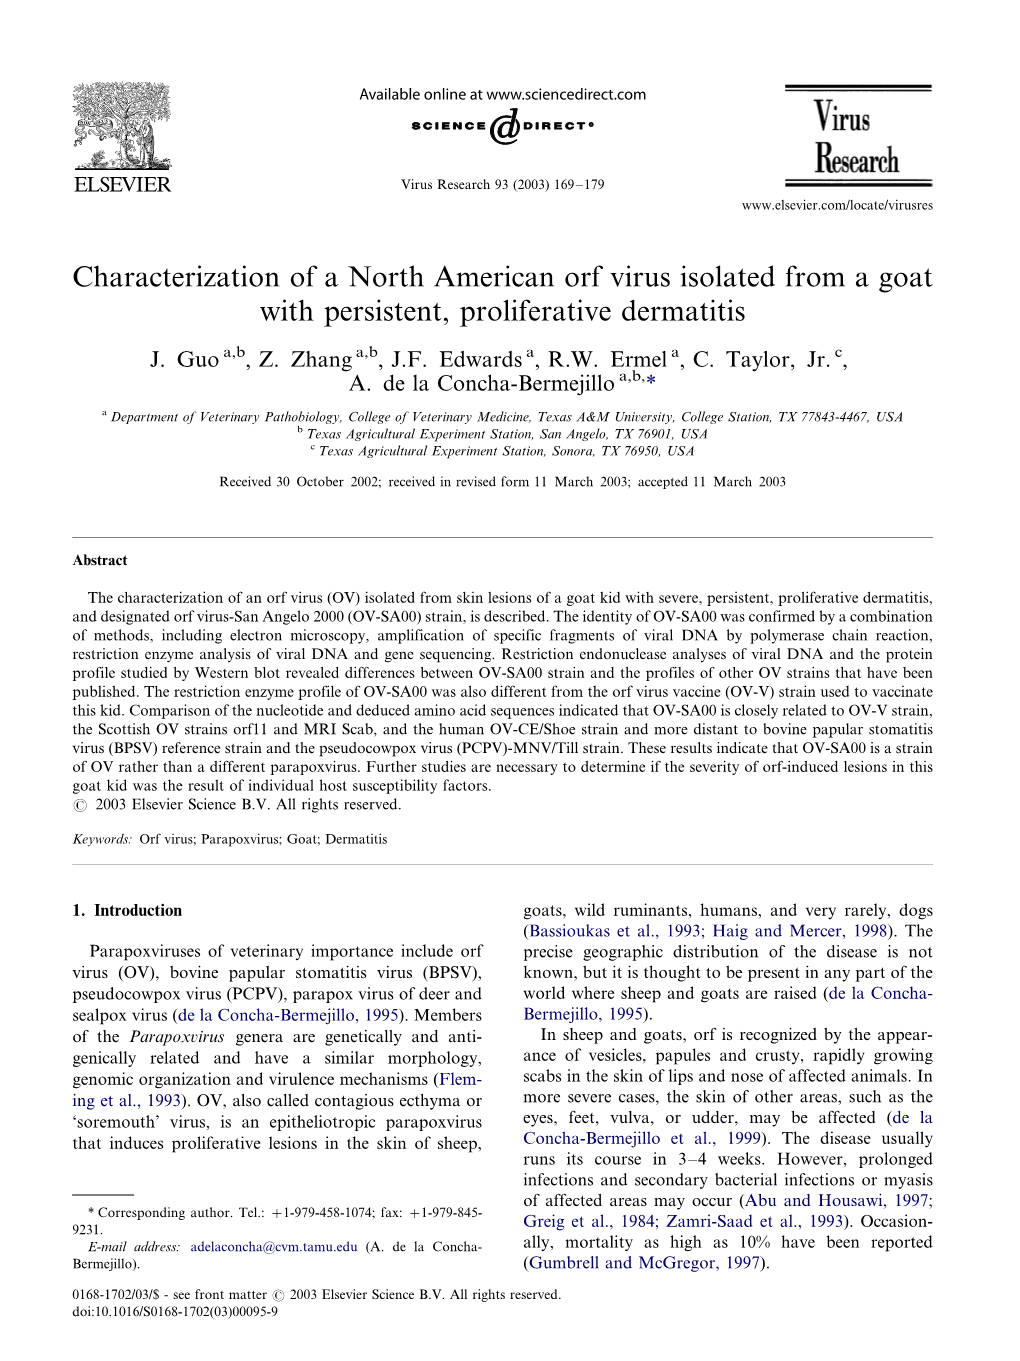 Characterization of a North American Orf Virus Isolated from a Goat with Persistent, Proliferative Dermatitis